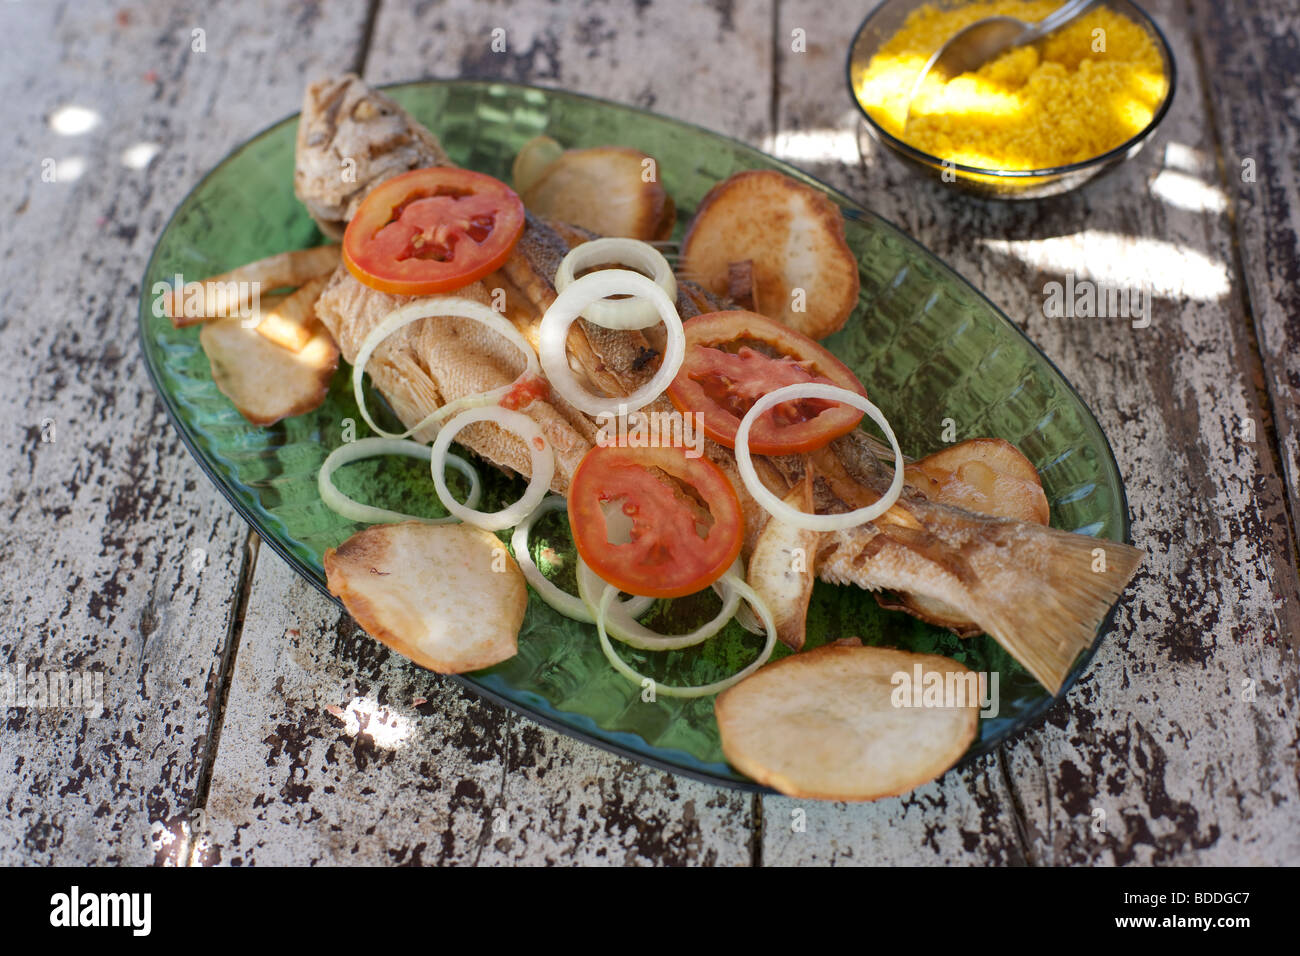 Whole fried fish with onion, tomatoes, potatoes chips and farofa Stock Photo